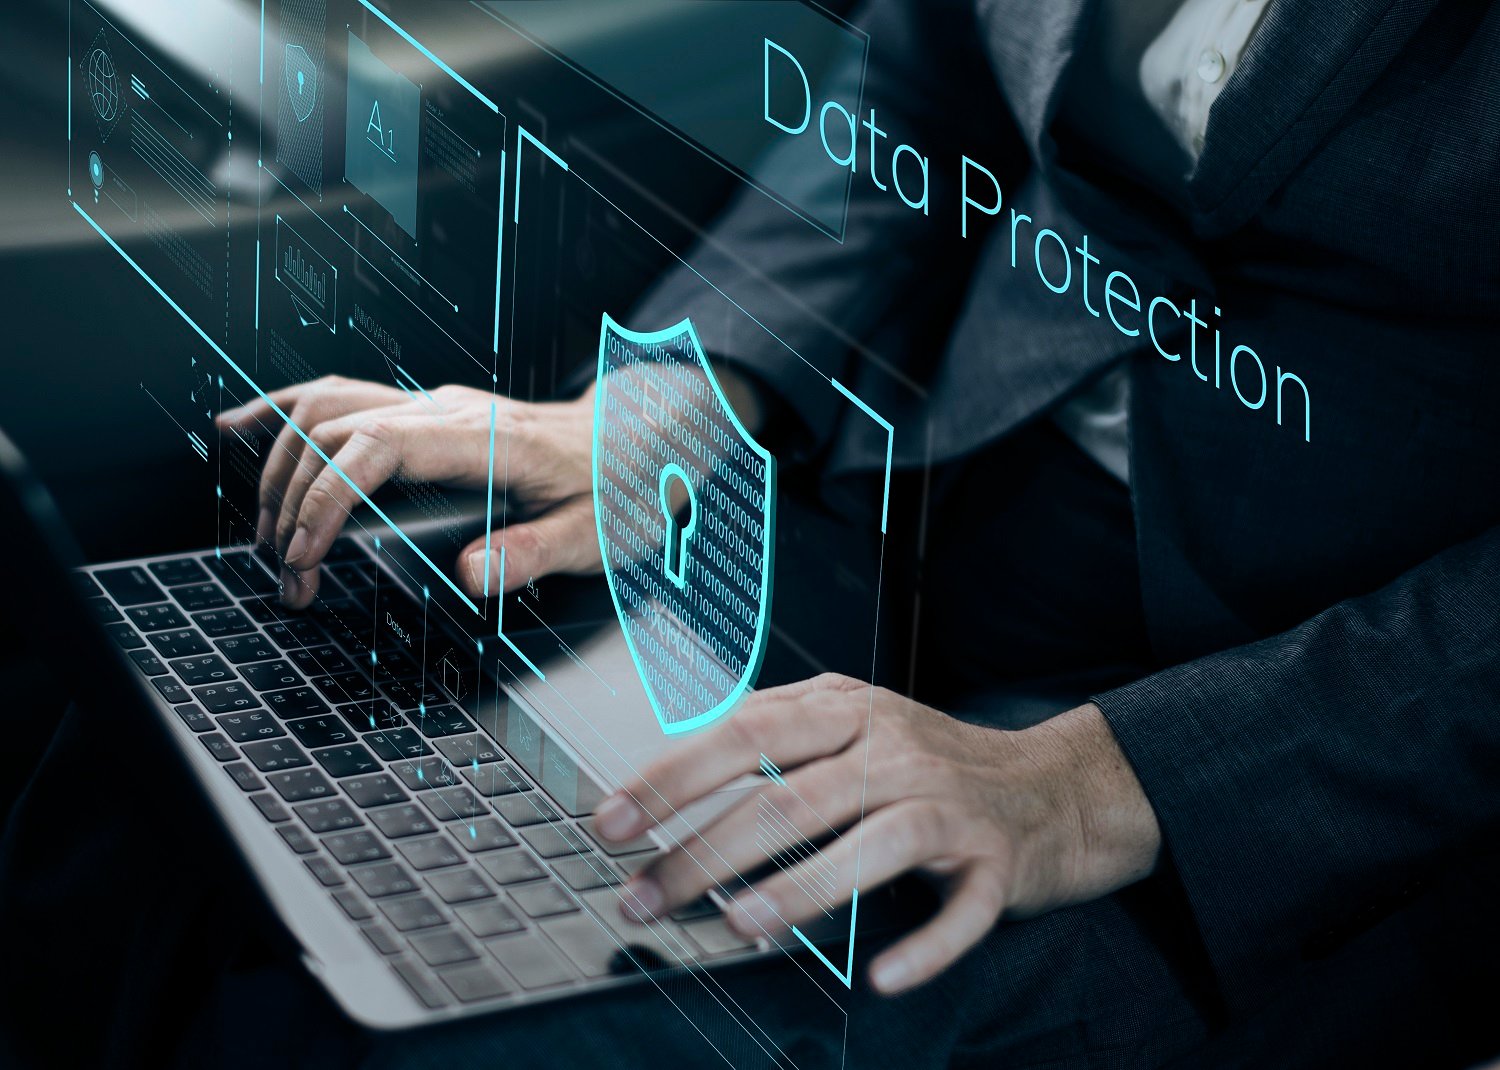 Personal Data Protection in the Digital Age